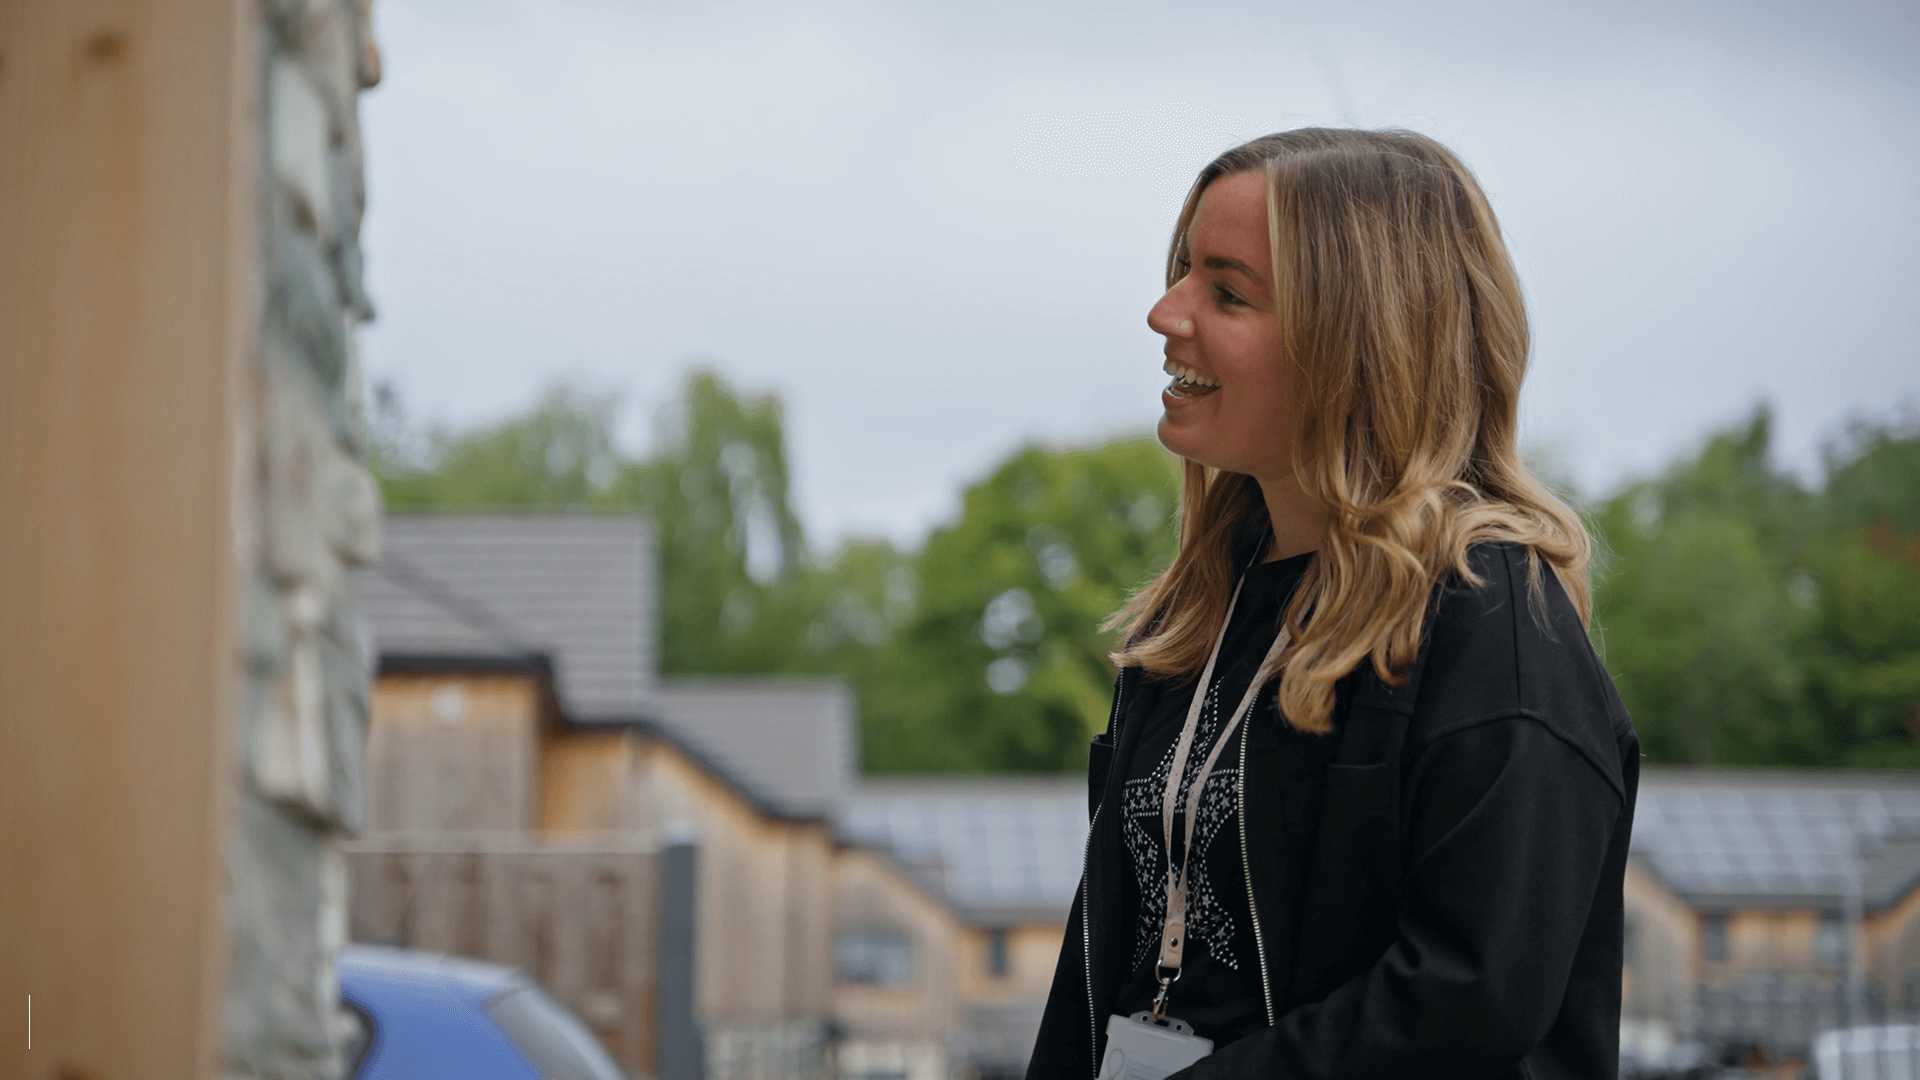 housing officer visiting a property